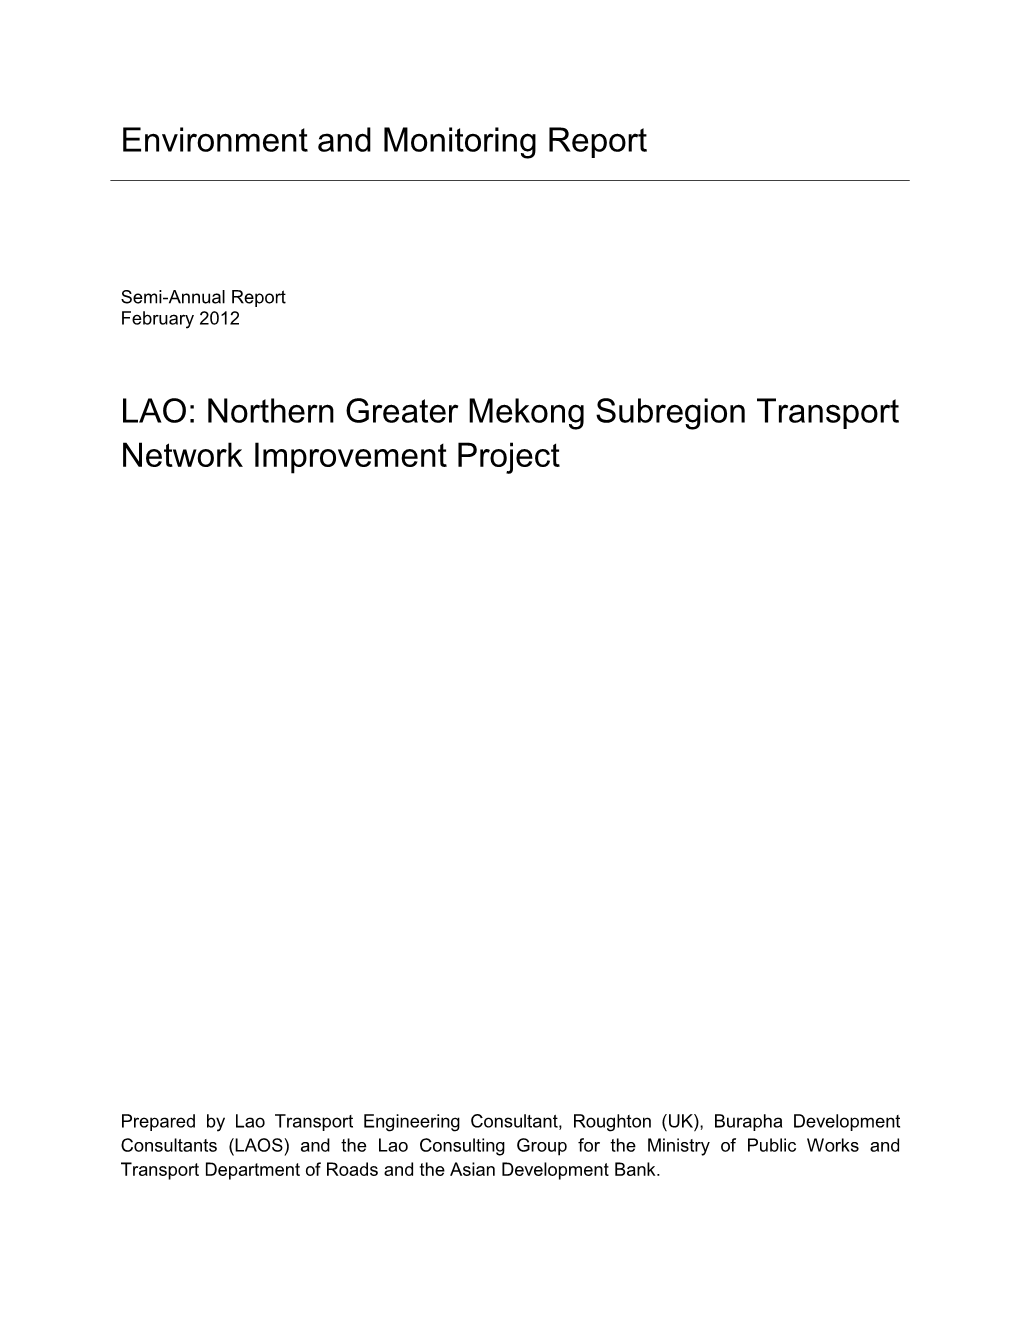 LAO: Northern Greater Mekong Subregion Transport Network Improvement Project